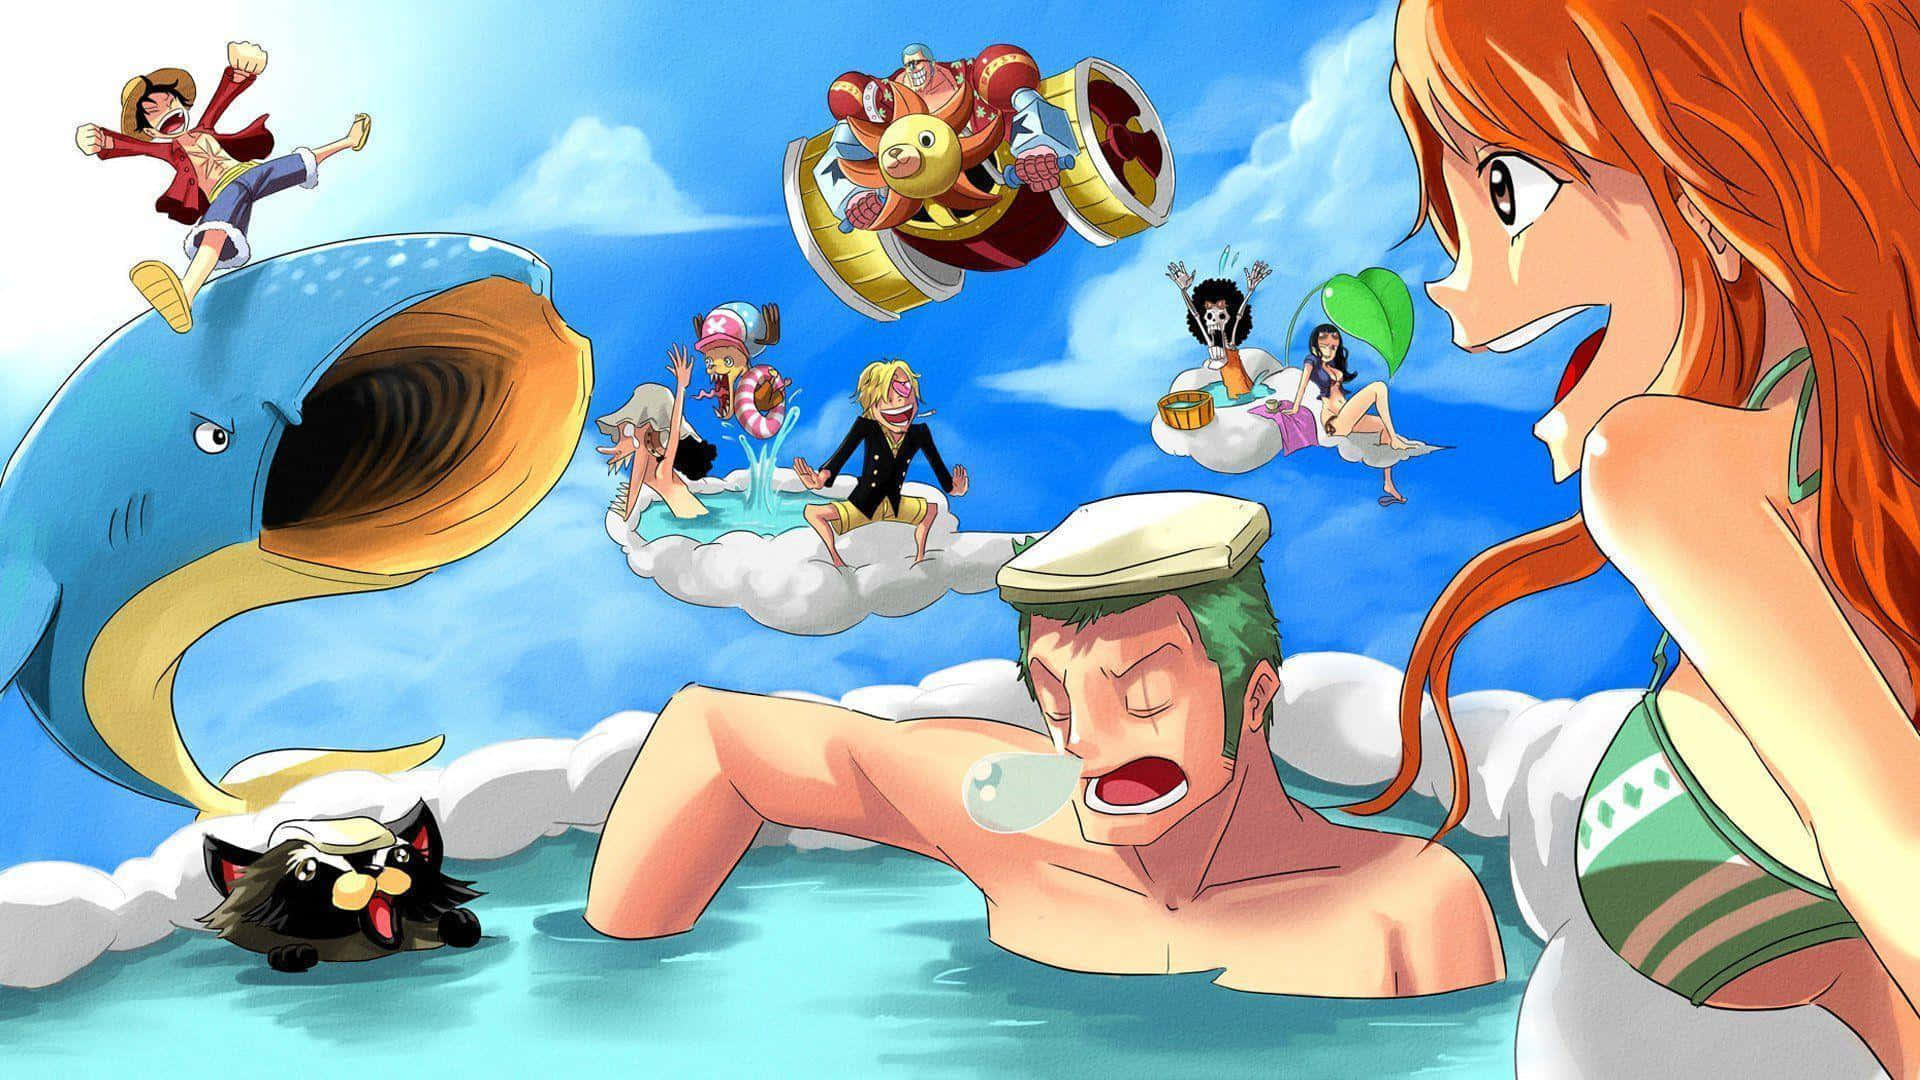 “Welcome to the world of Franky” Wallpaper